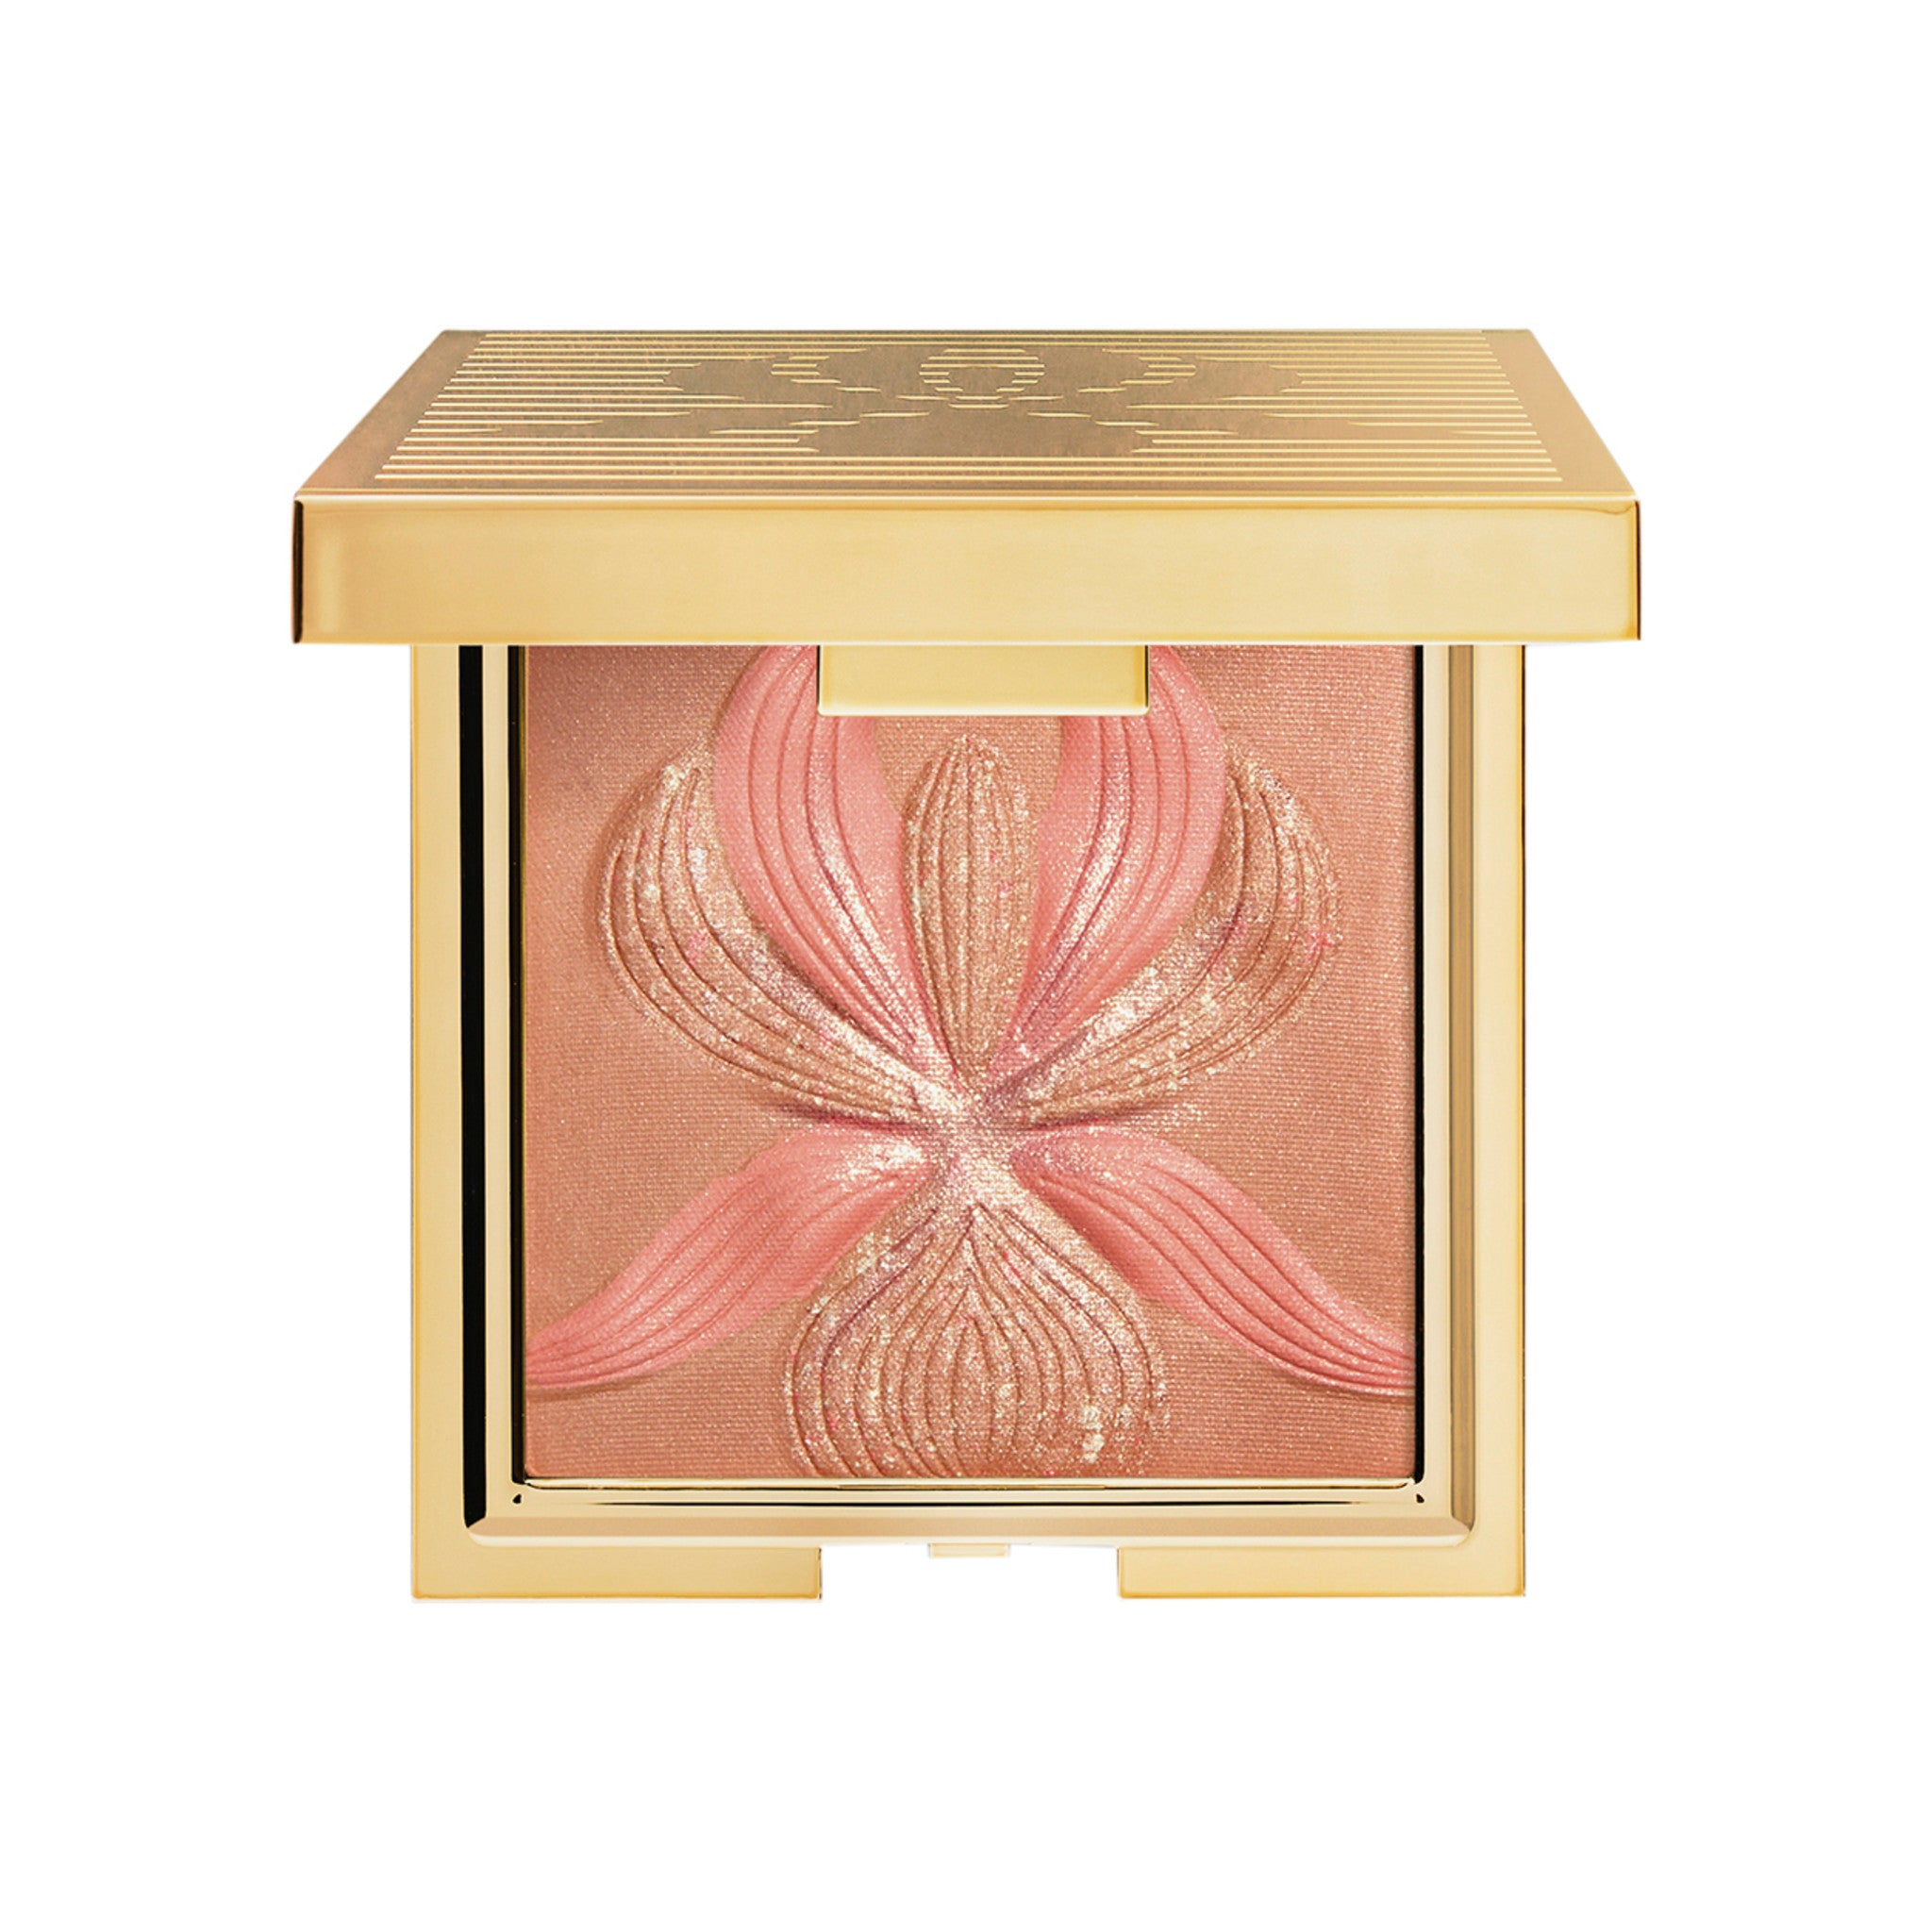 Sisley-Paris L'Orchidée Blush Color/Shade variant: 1 L'Orchidée main image. This product is in the color nude